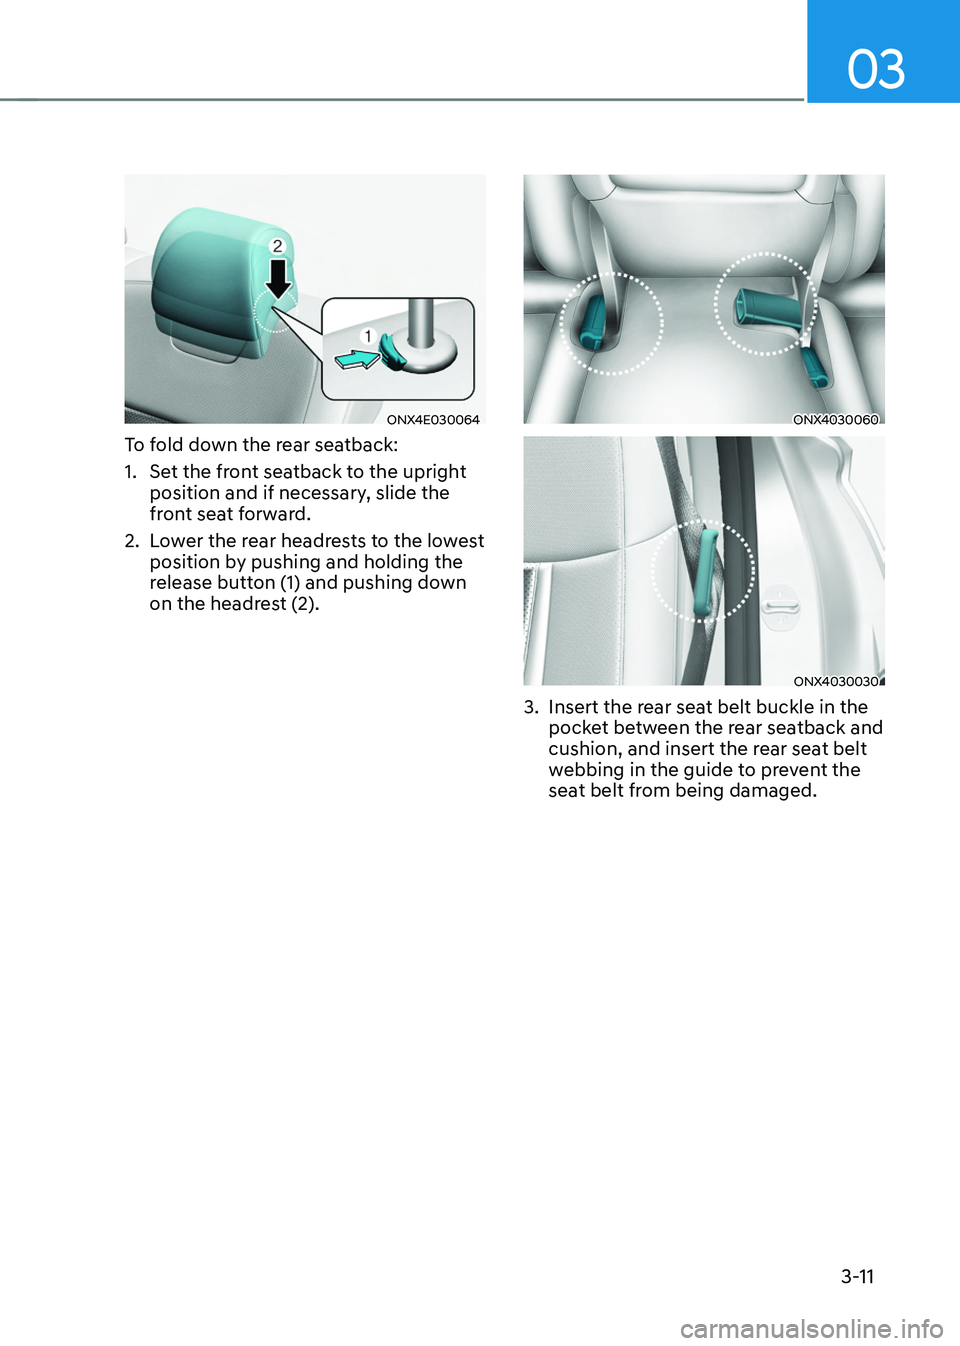 HYUNDAI TUCSON 2022 Service Manual 03
3-11
ONX4E030064
To fold down the rear seatback: 
1. Set the front seatback to the upright 
position and if necessary, slide the 
front seat forward. 
2. Lower the rear headrests to the lowest 
pos